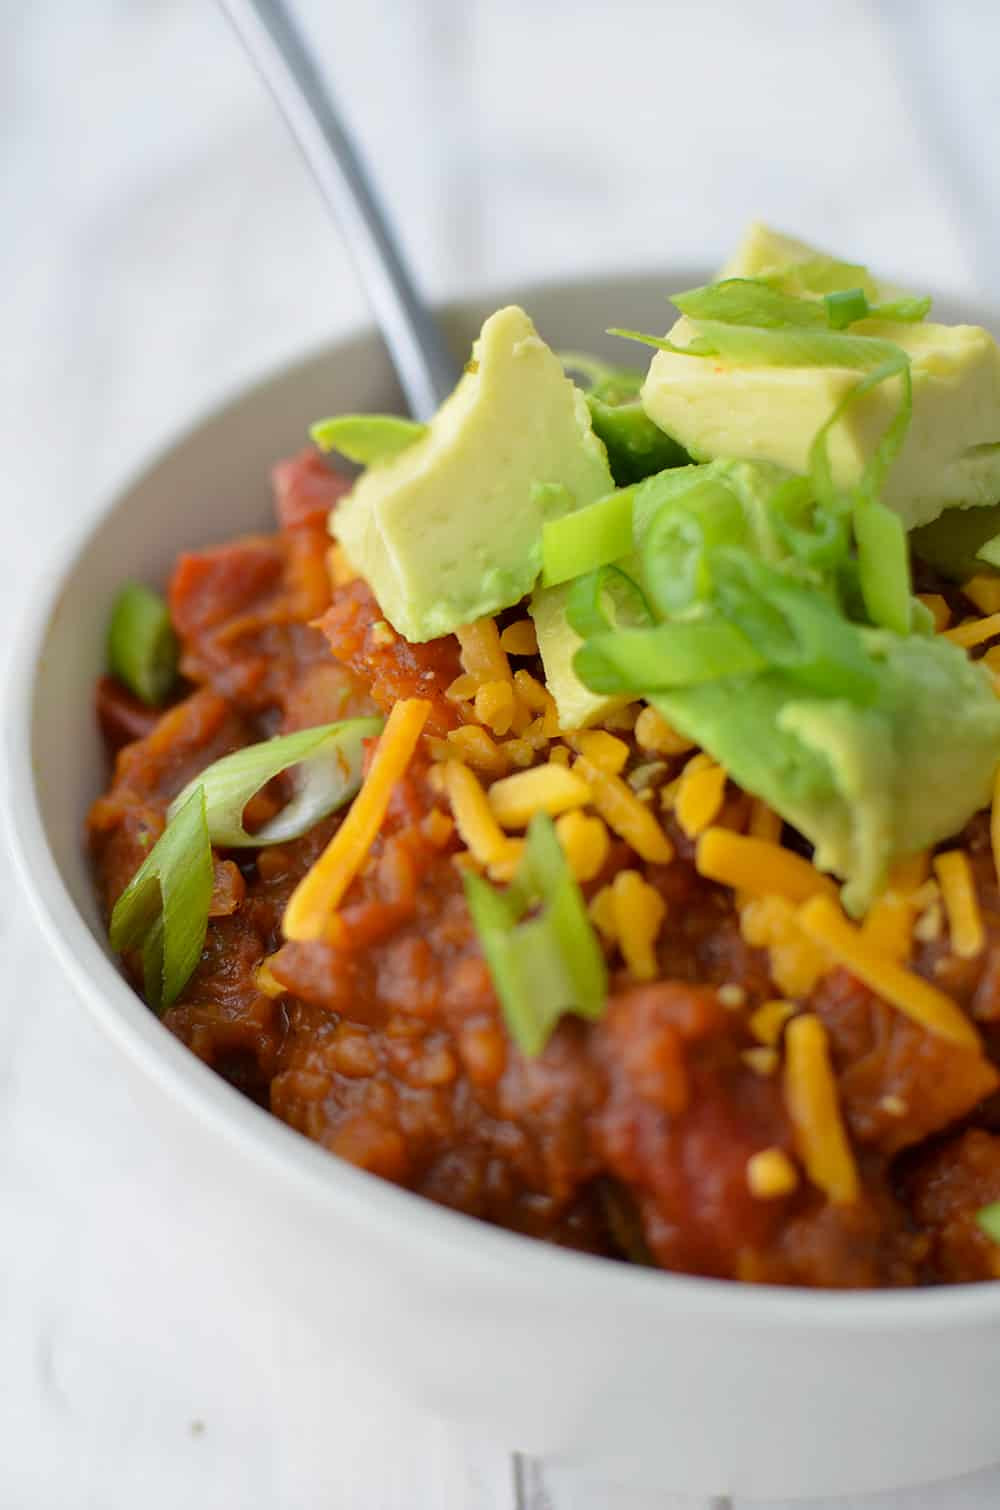 Vegetarian Chili With Squash
 ve arian chili slow cooker butternut squash